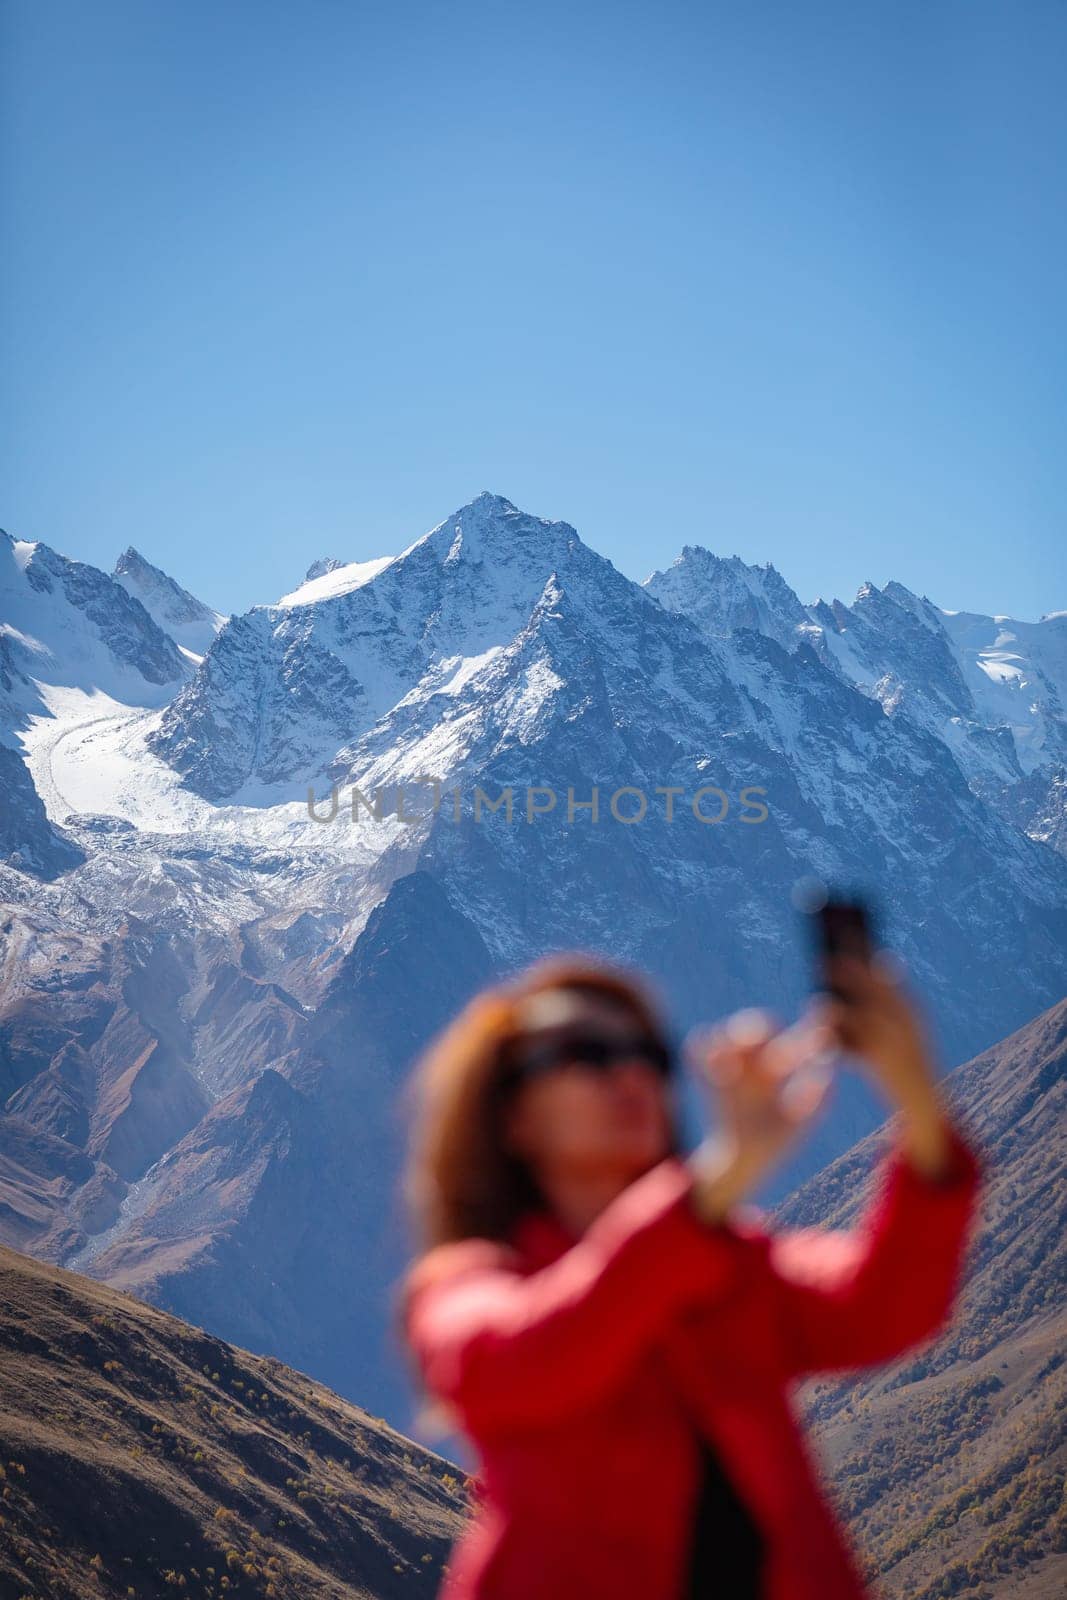 Portrait of a girl against the background of snowy mountains creates a magical mood